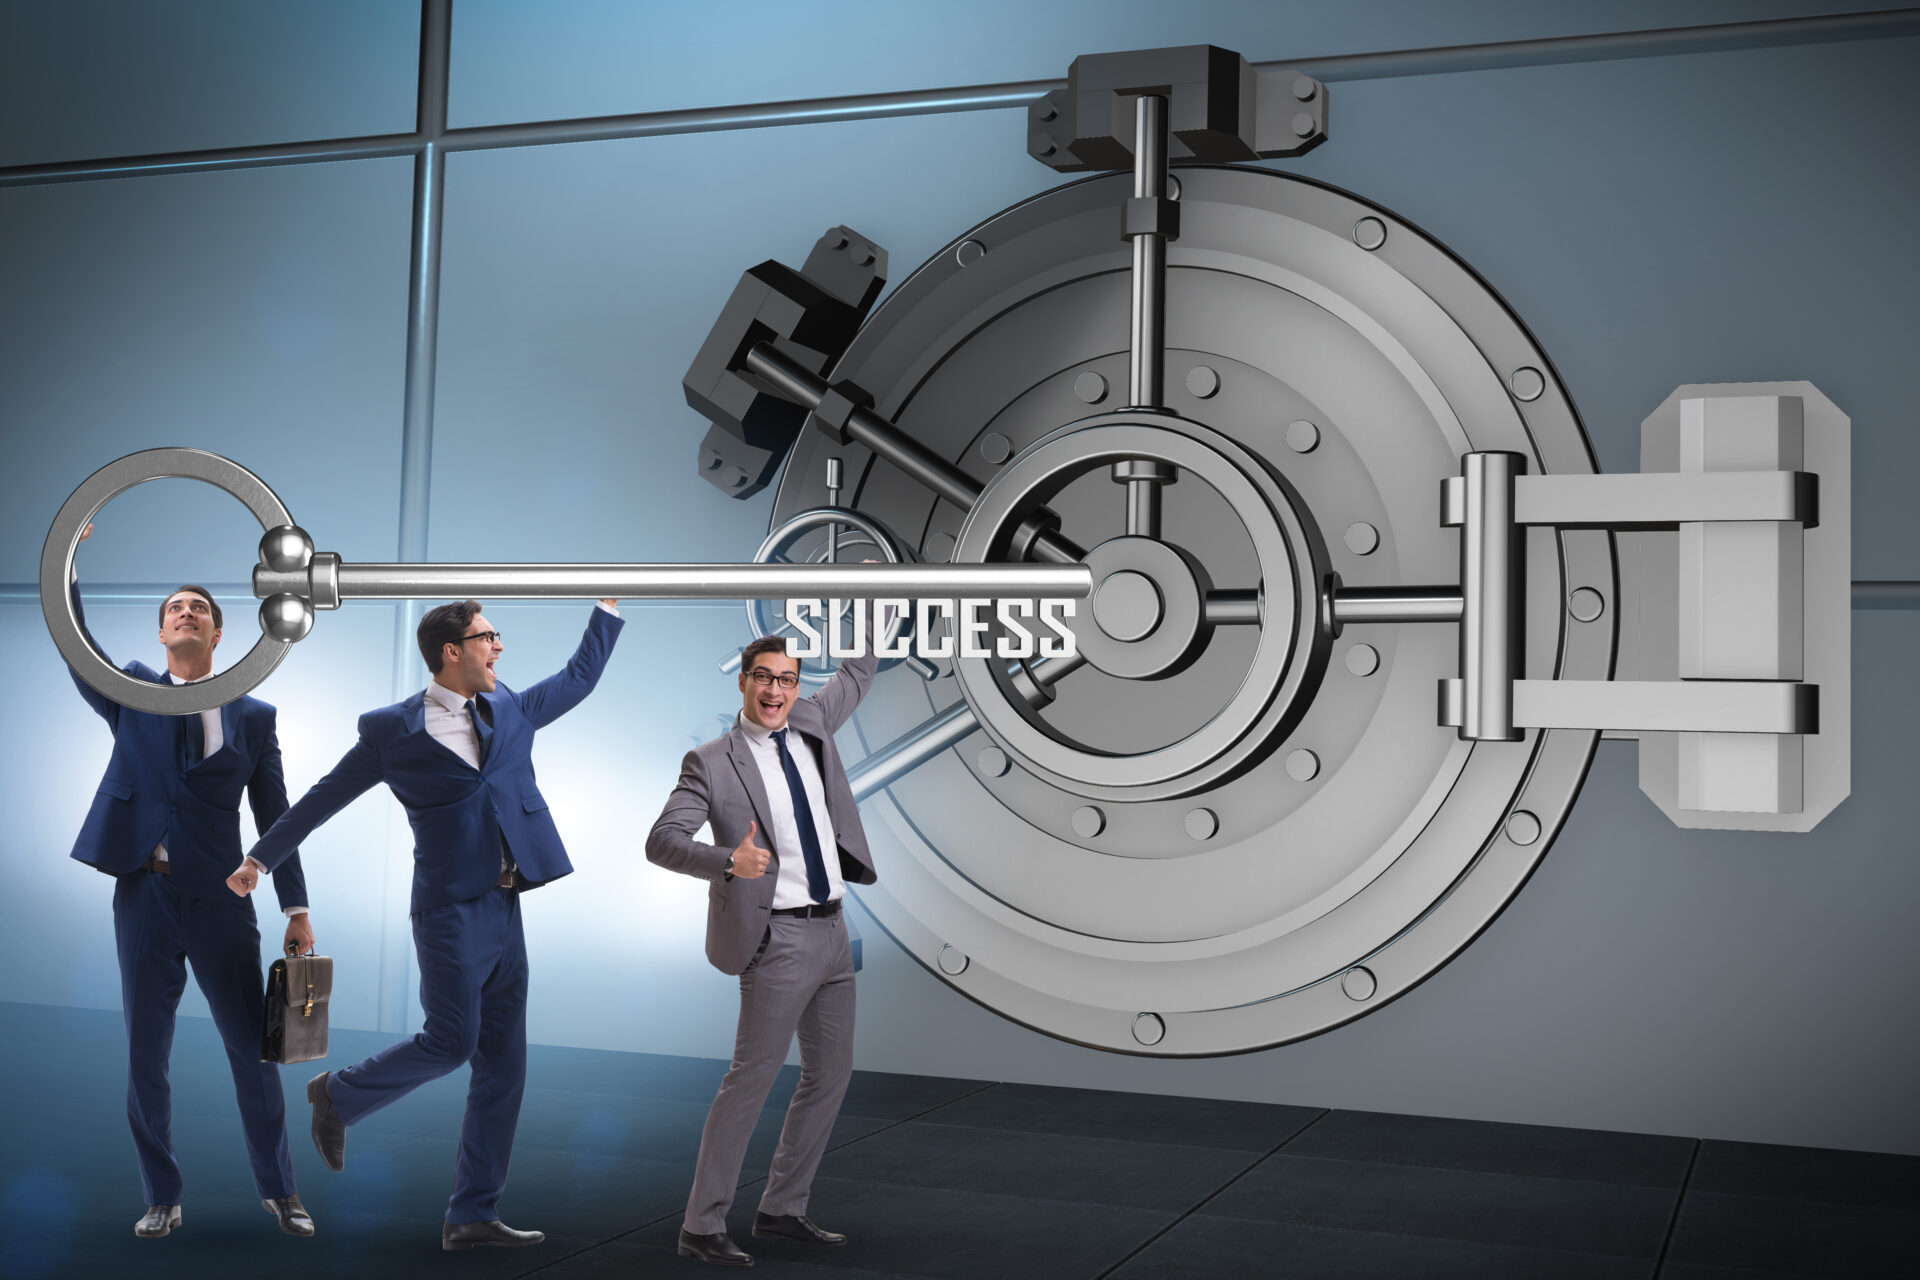 Business professionals opening a vault with a success key